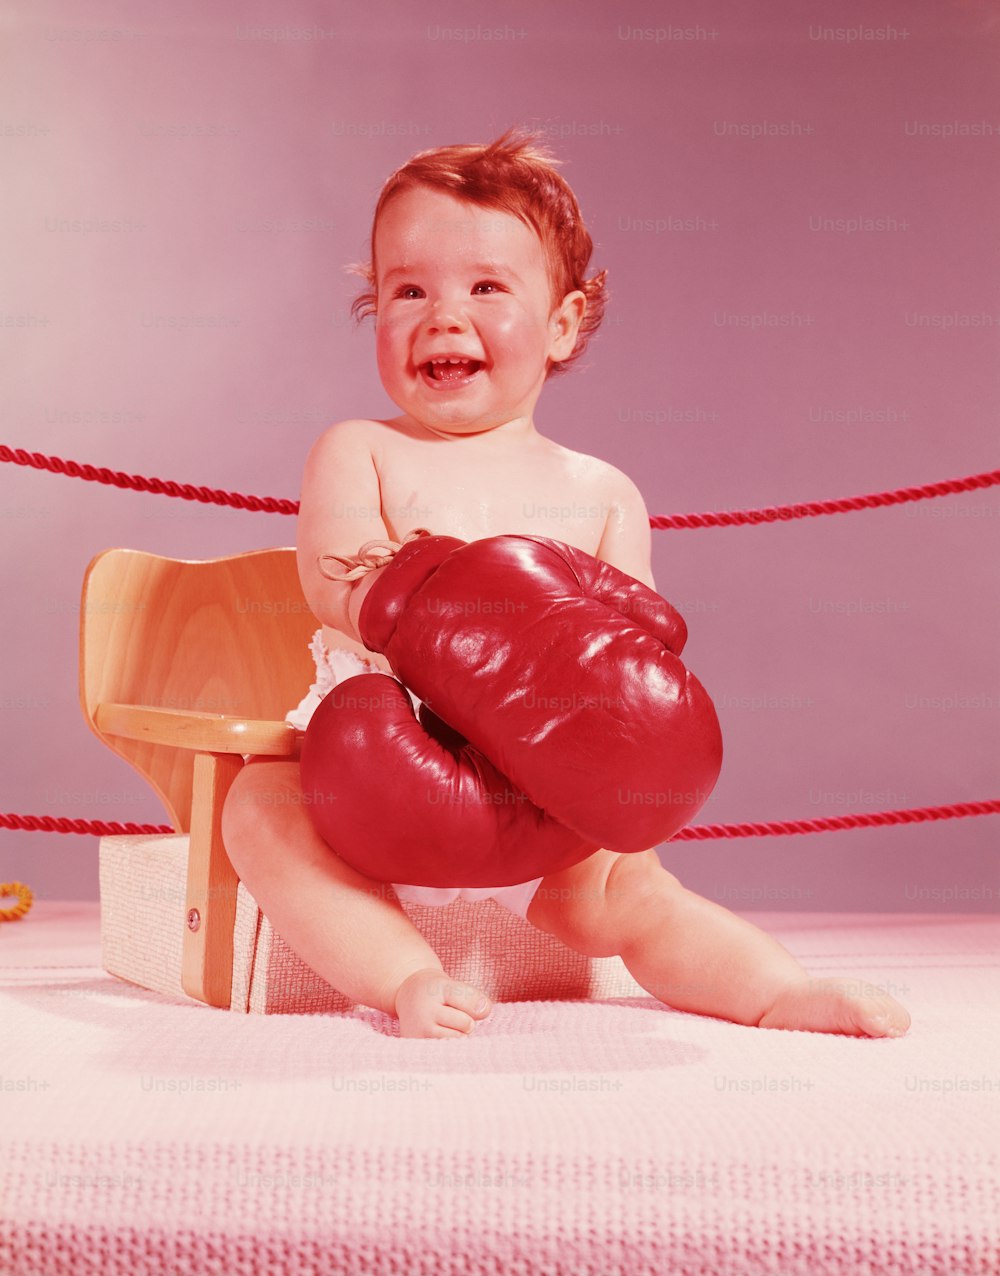 UNITED STATES - CIRCA 1950s:  Baby sat on chair in boxing ring, wearing boxing gloves, smiling.